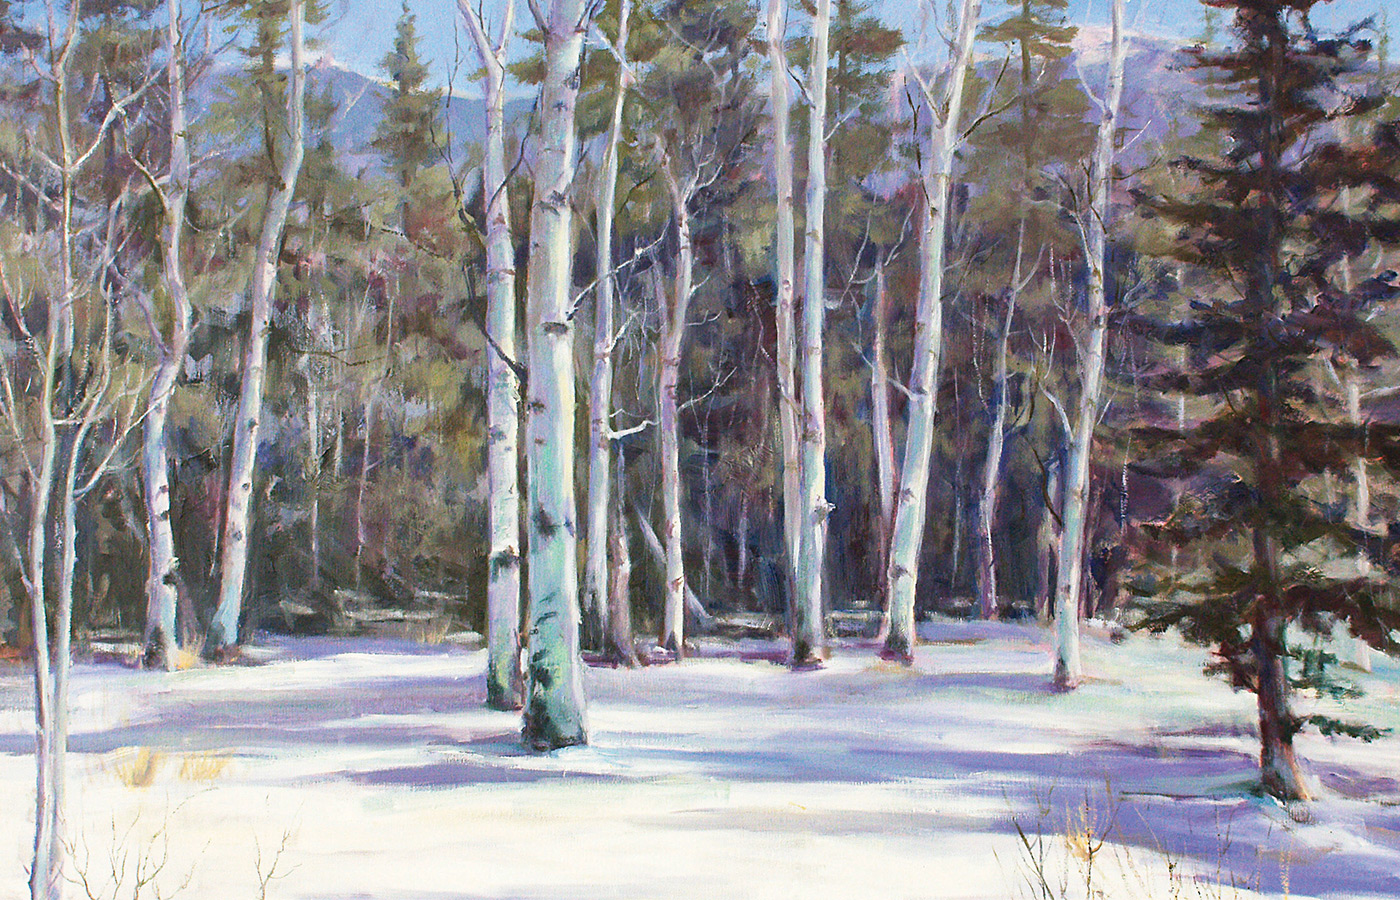 A painting of birch trees in the winter.